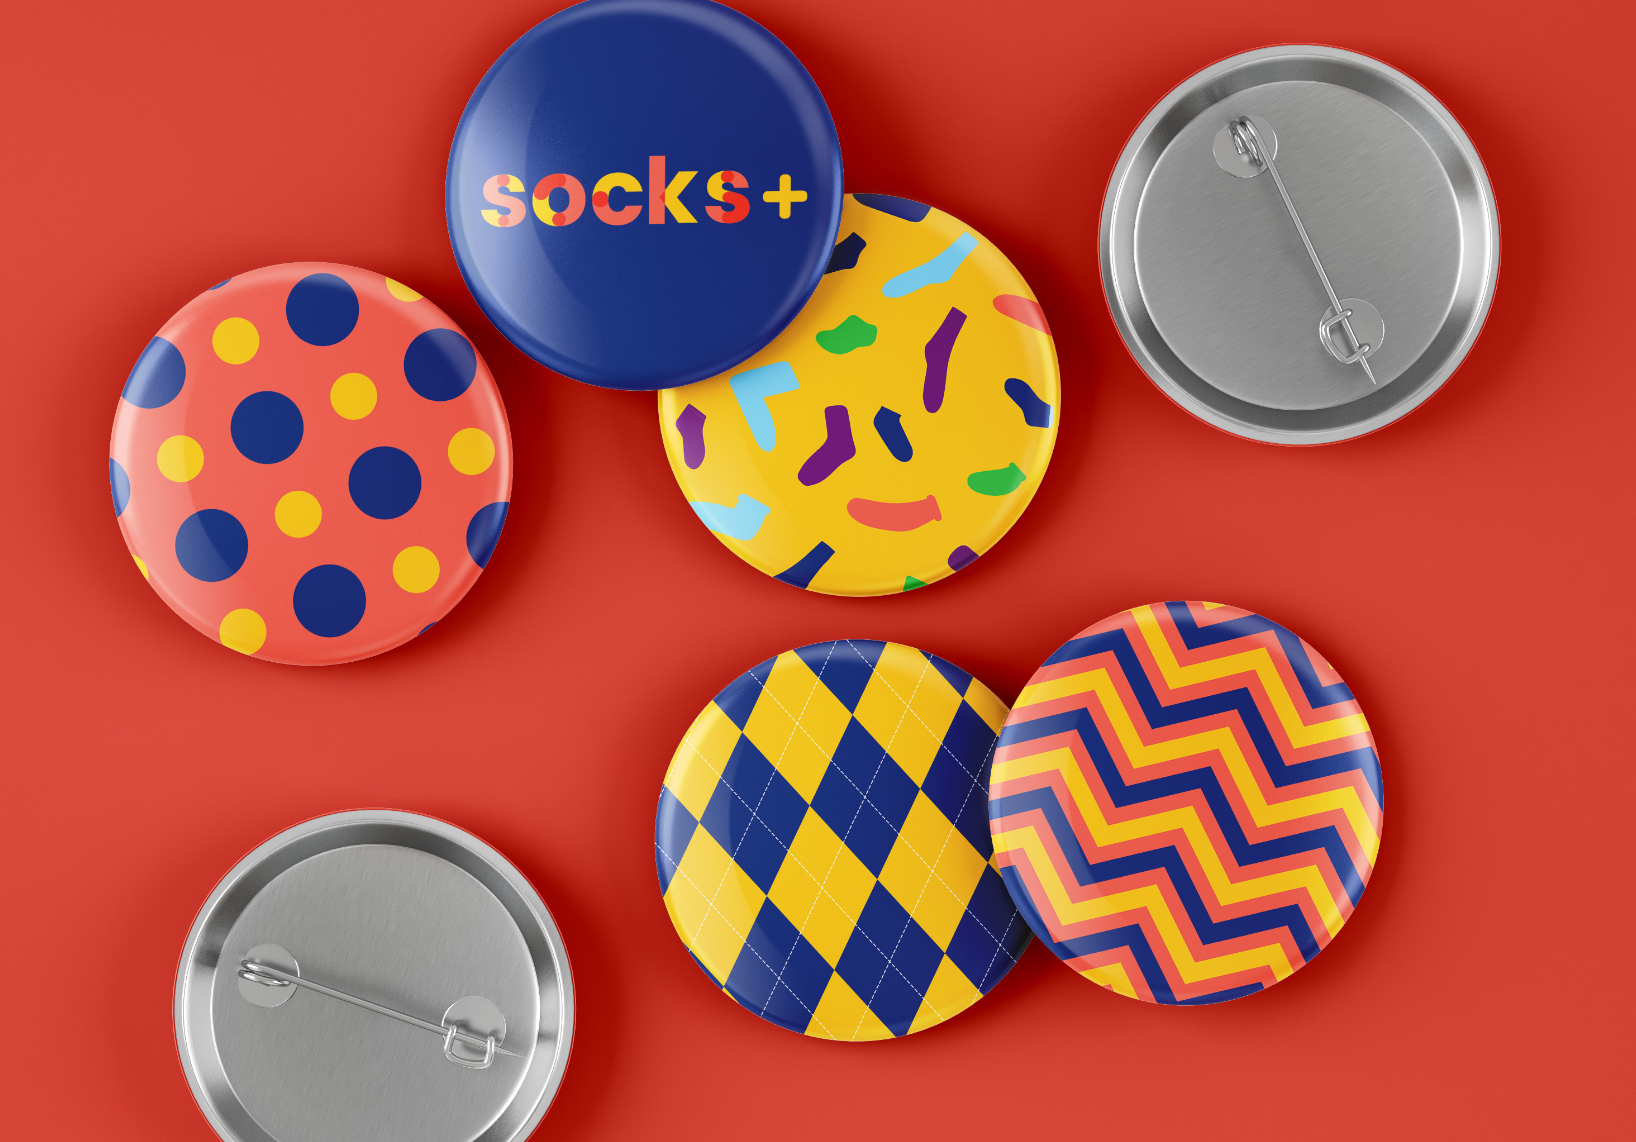 Socks+ Campaign buttons